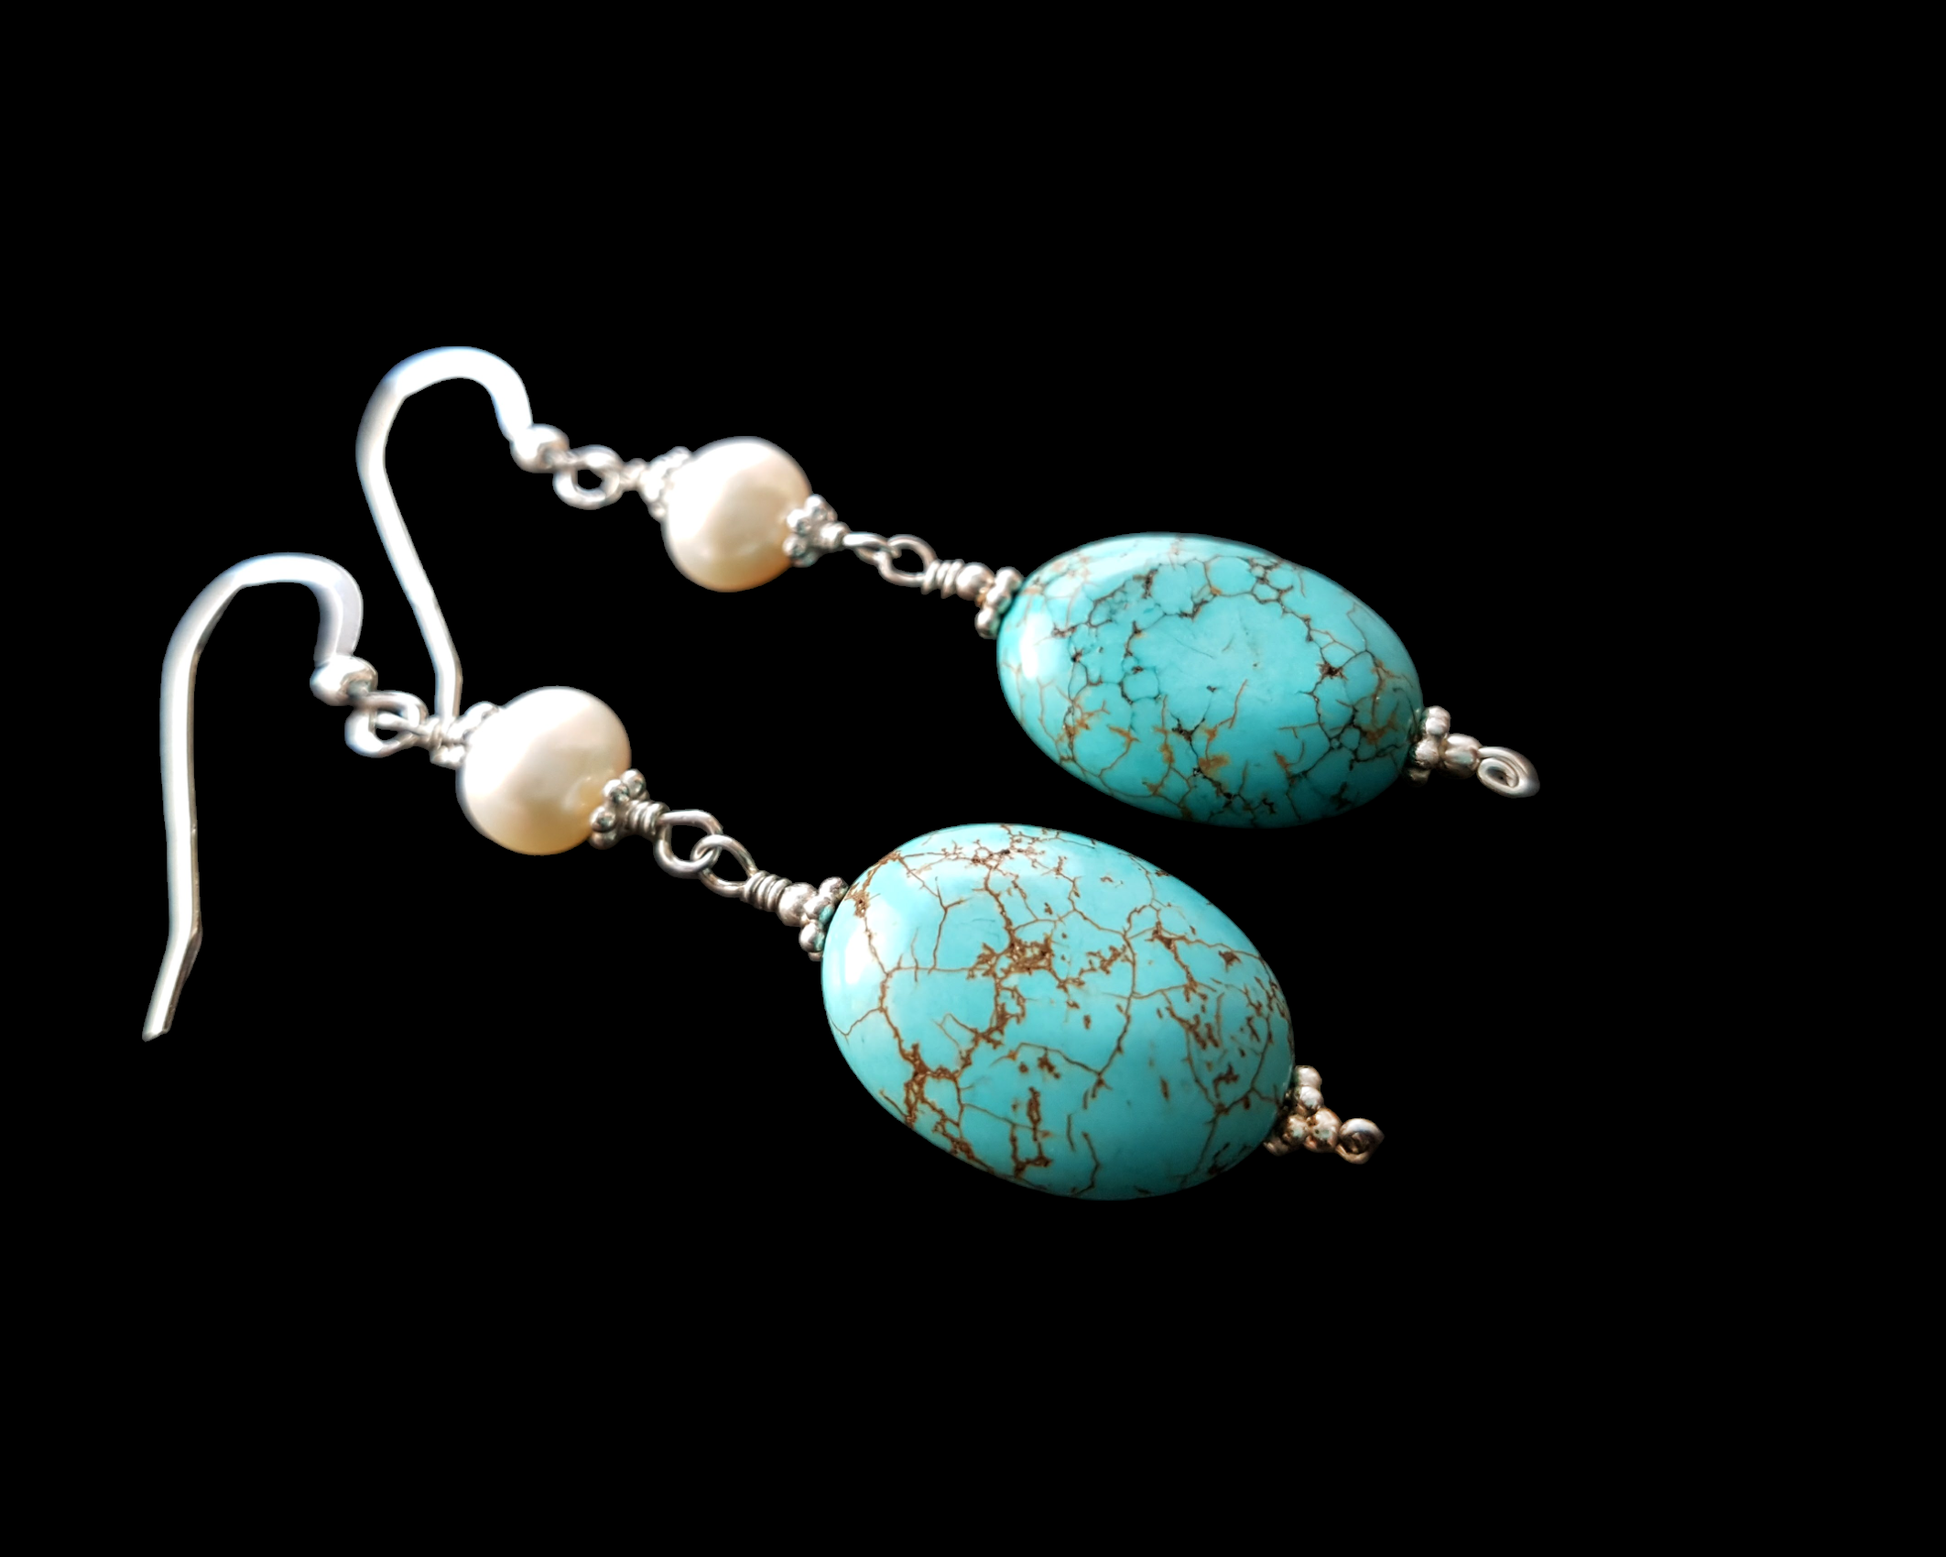 Long Art Deco Style Turquoise Pearl Dangle Earrings with Oval shaped Turquoise stone and round white pearls above, french style earring hooks on black background